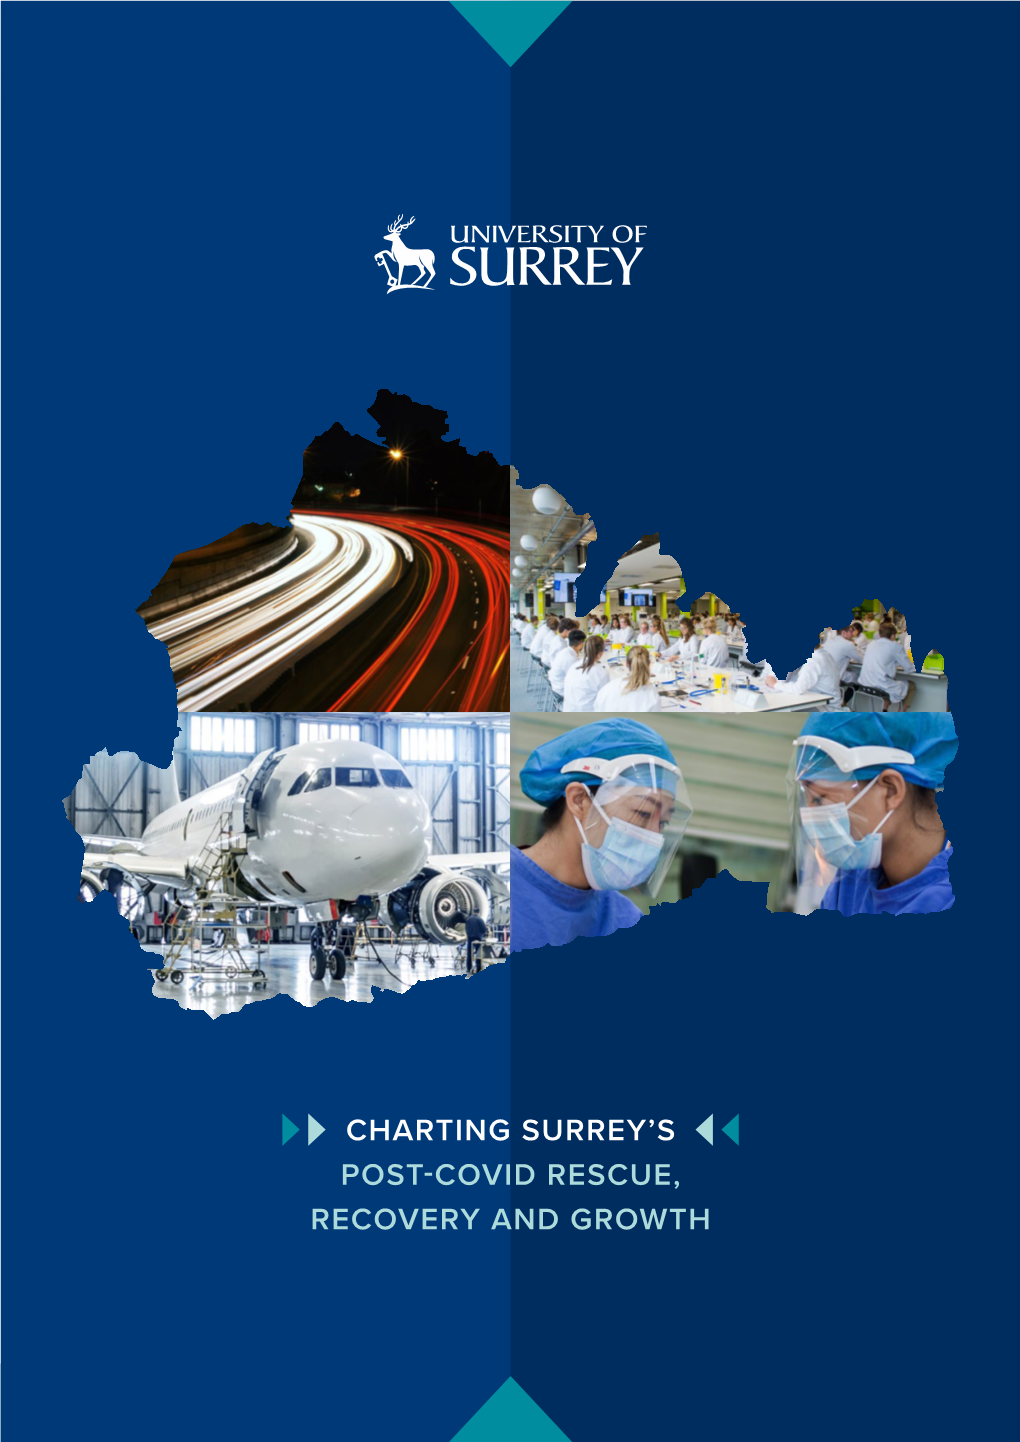 Charting Surrey's Post-Covid Rescue, Recovery and Growth